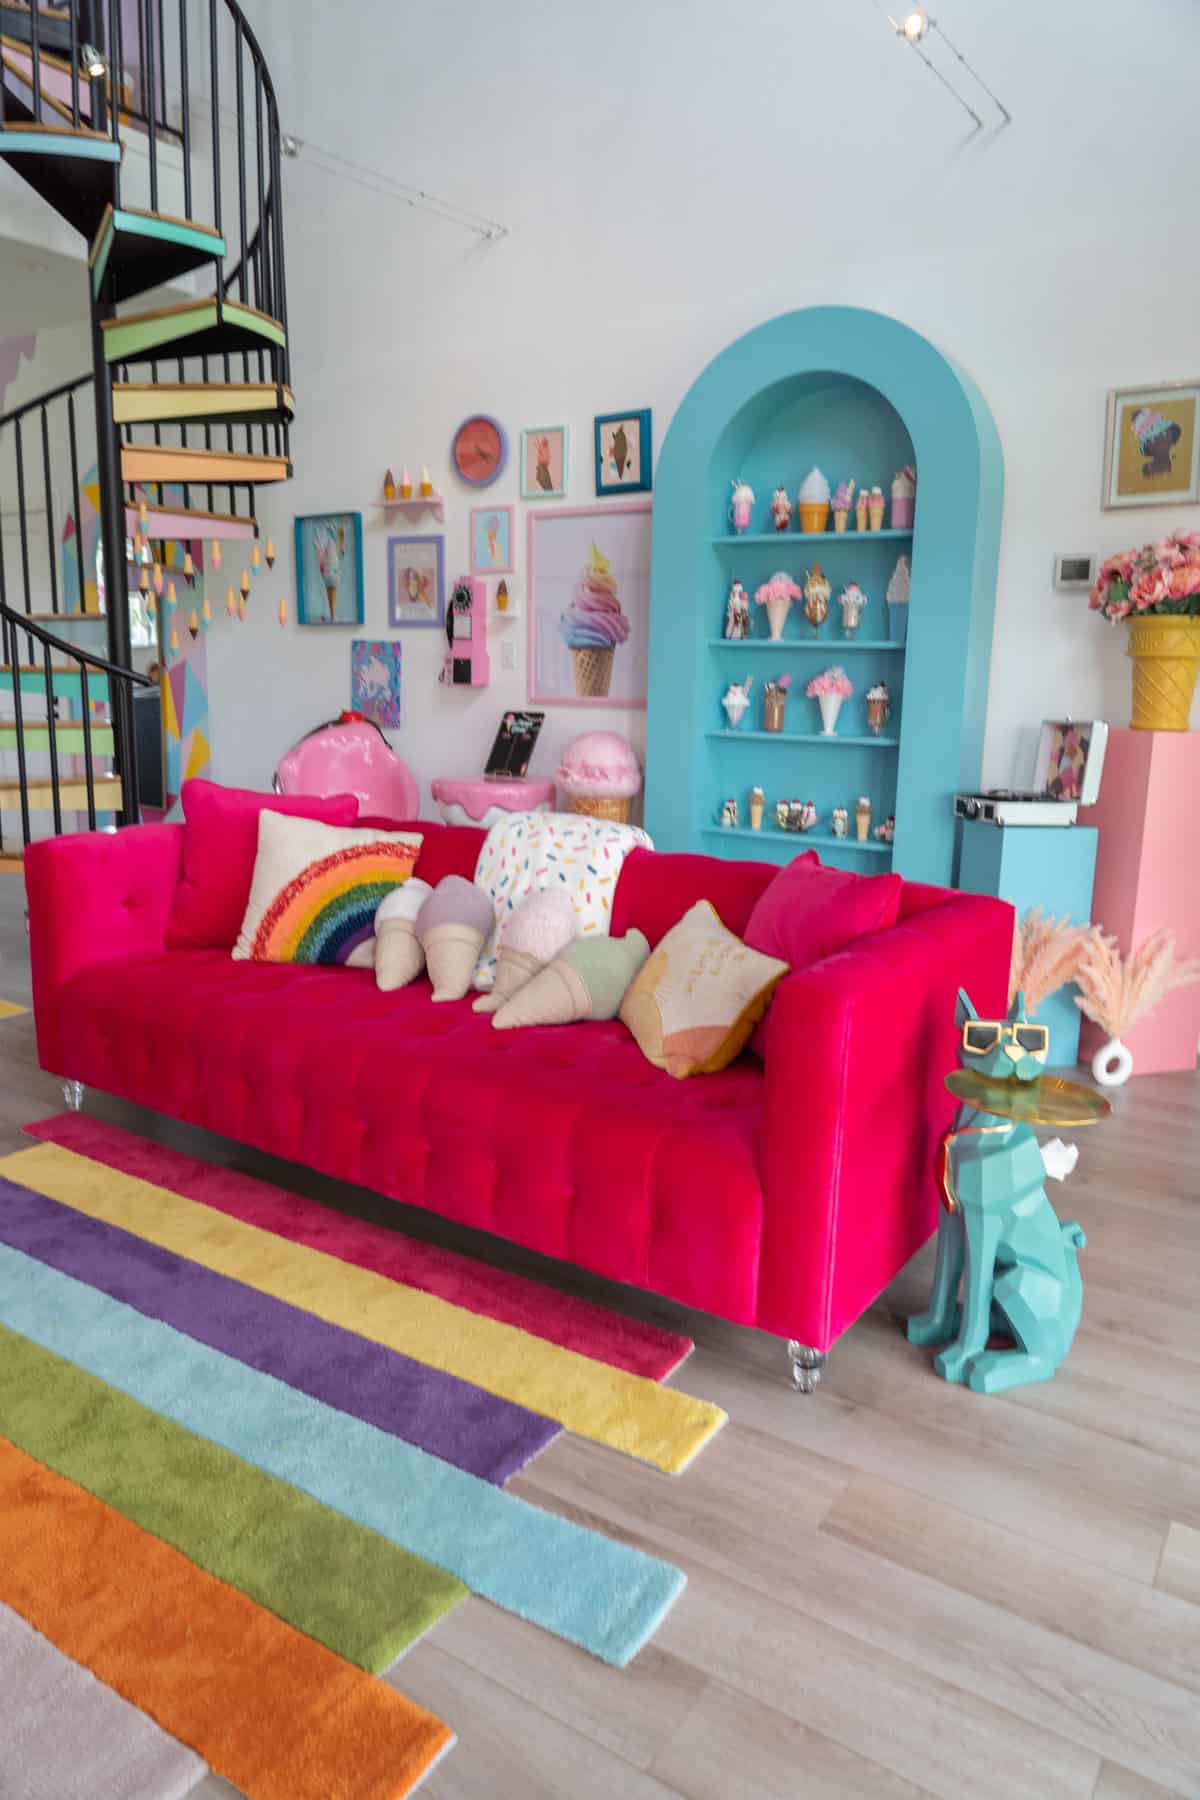 a pink couch with ice cream cones on it